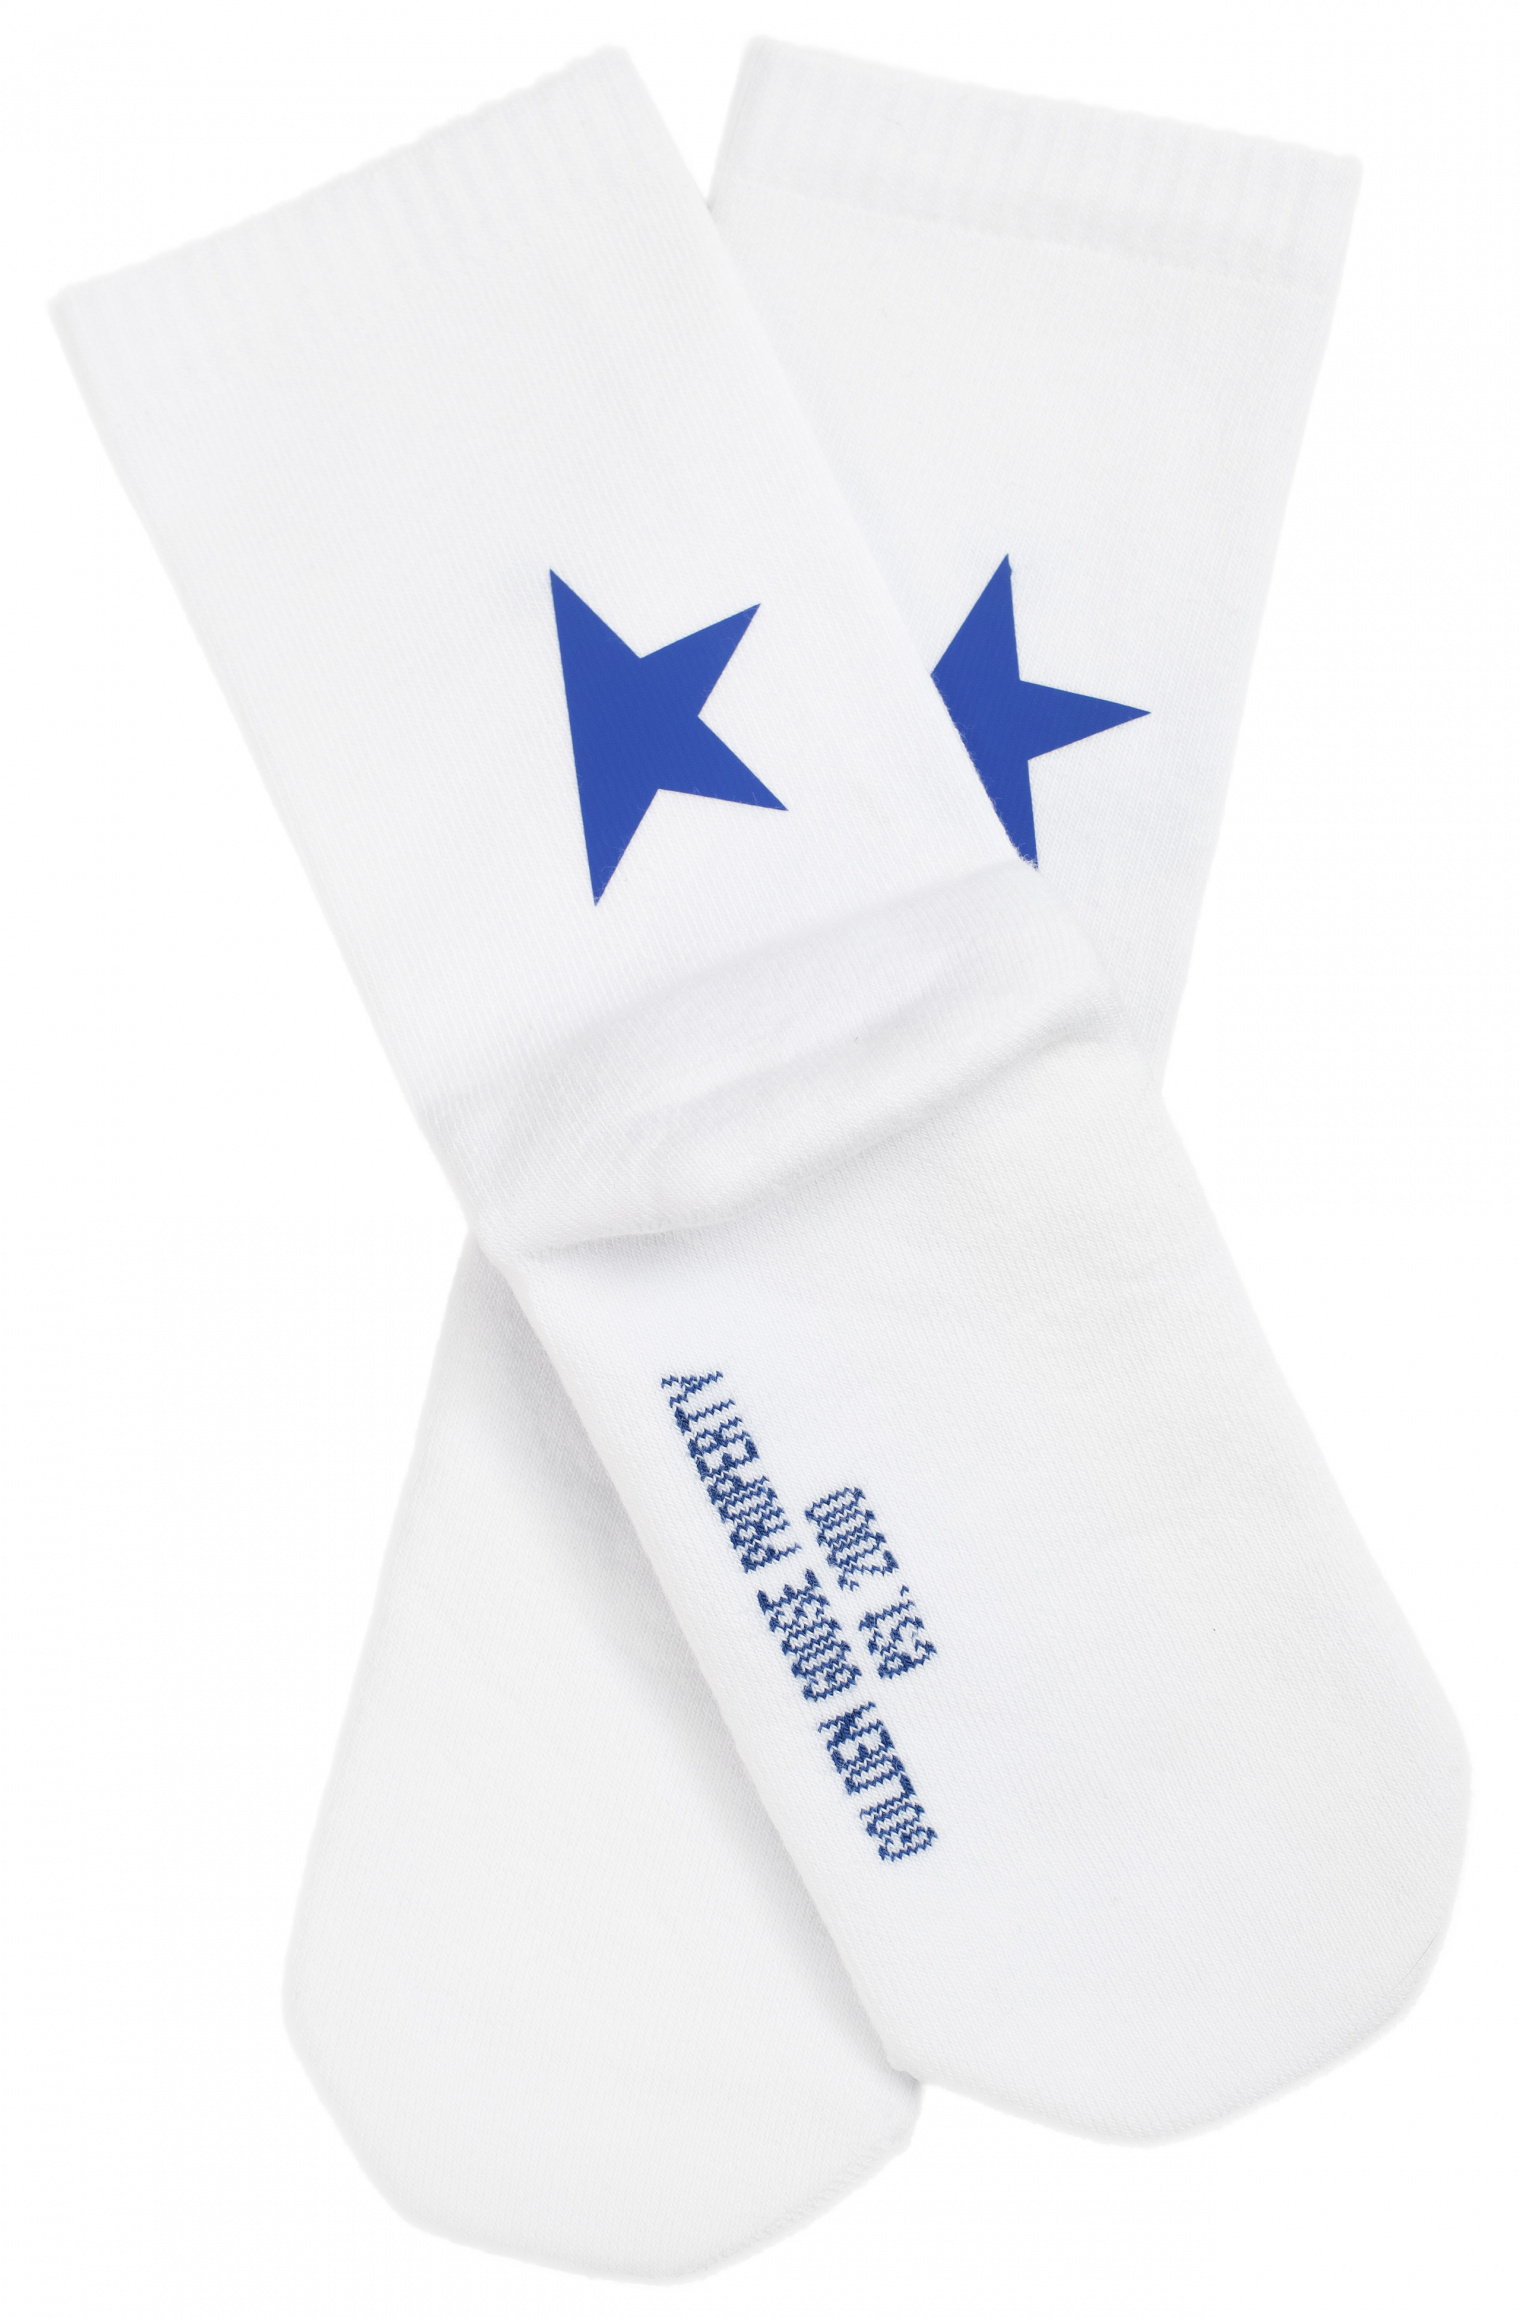 Golden Goose Star Collection socks with contrasting star